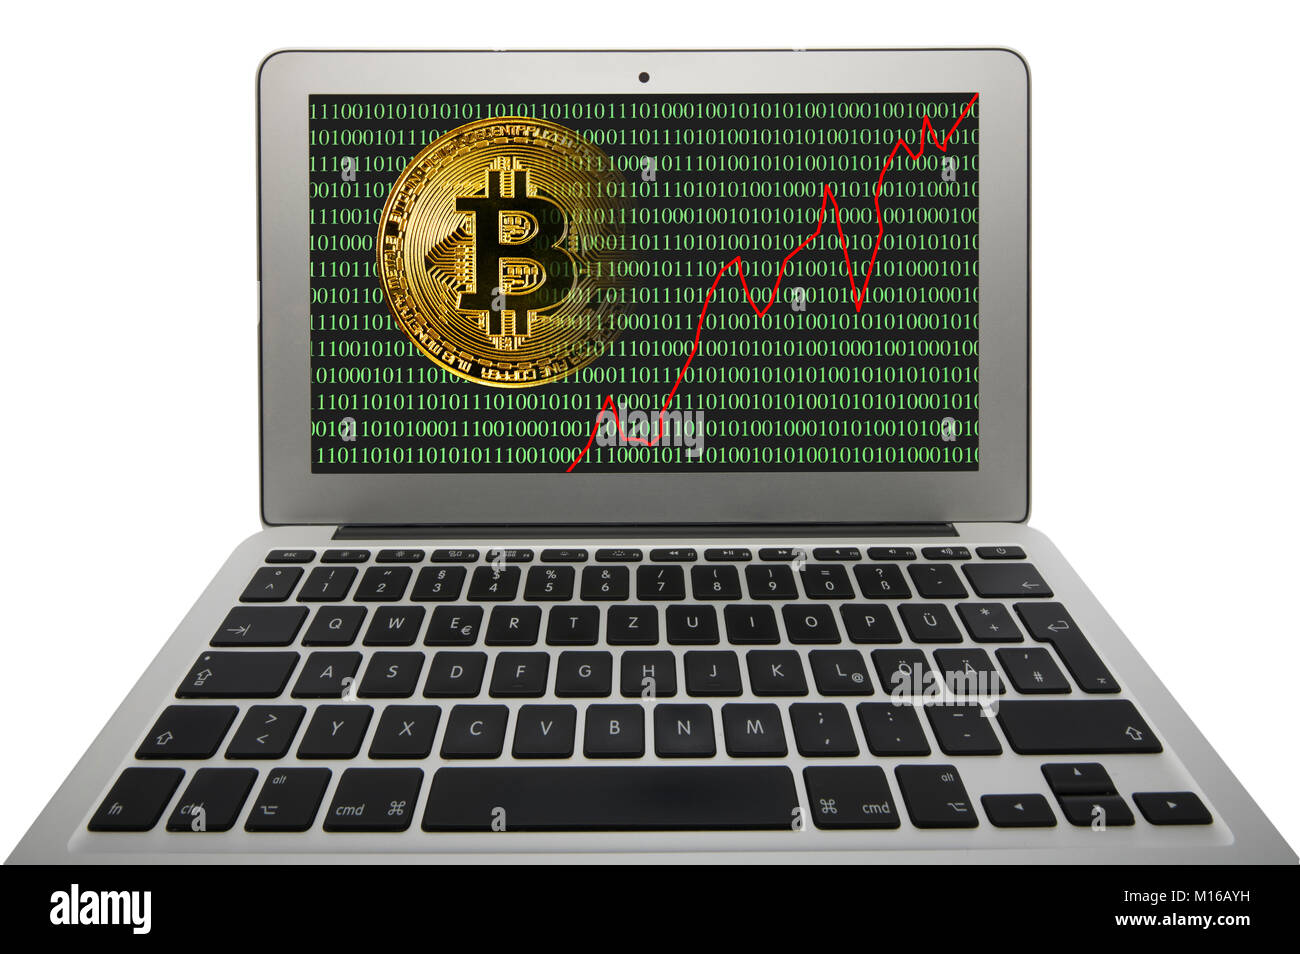 Symbol image turbulence, volatility, stock price digital currency, gold physical coin bitcoin laptop with digital binary code Stock Photo